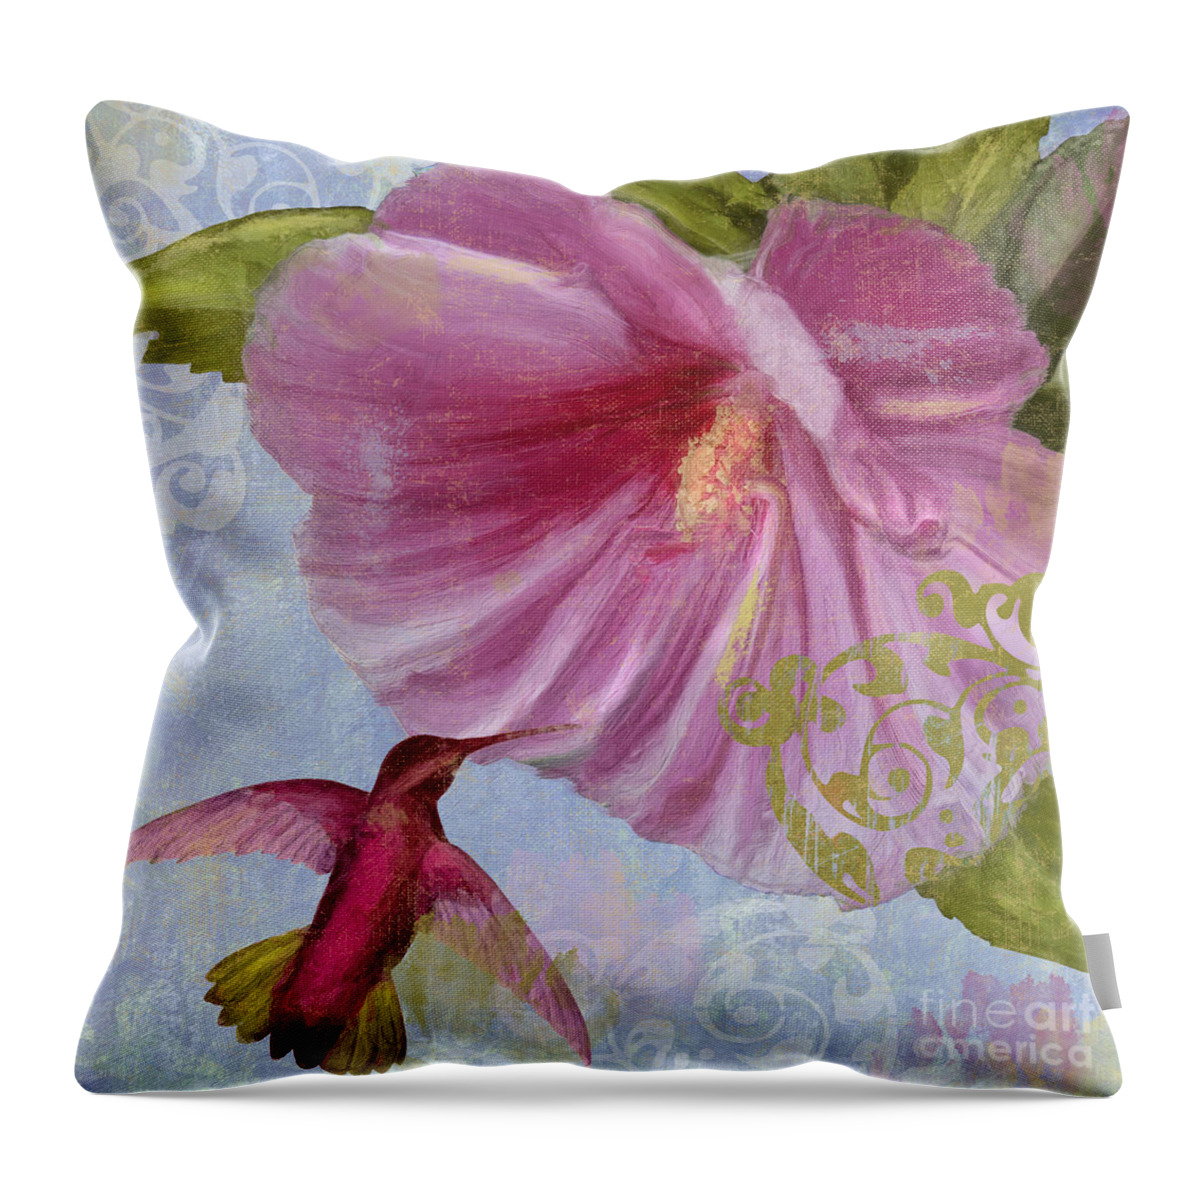 Hummingbird Throw Pillow featuring the painting Hummingbird Hibiscus I by Mindy Sommers